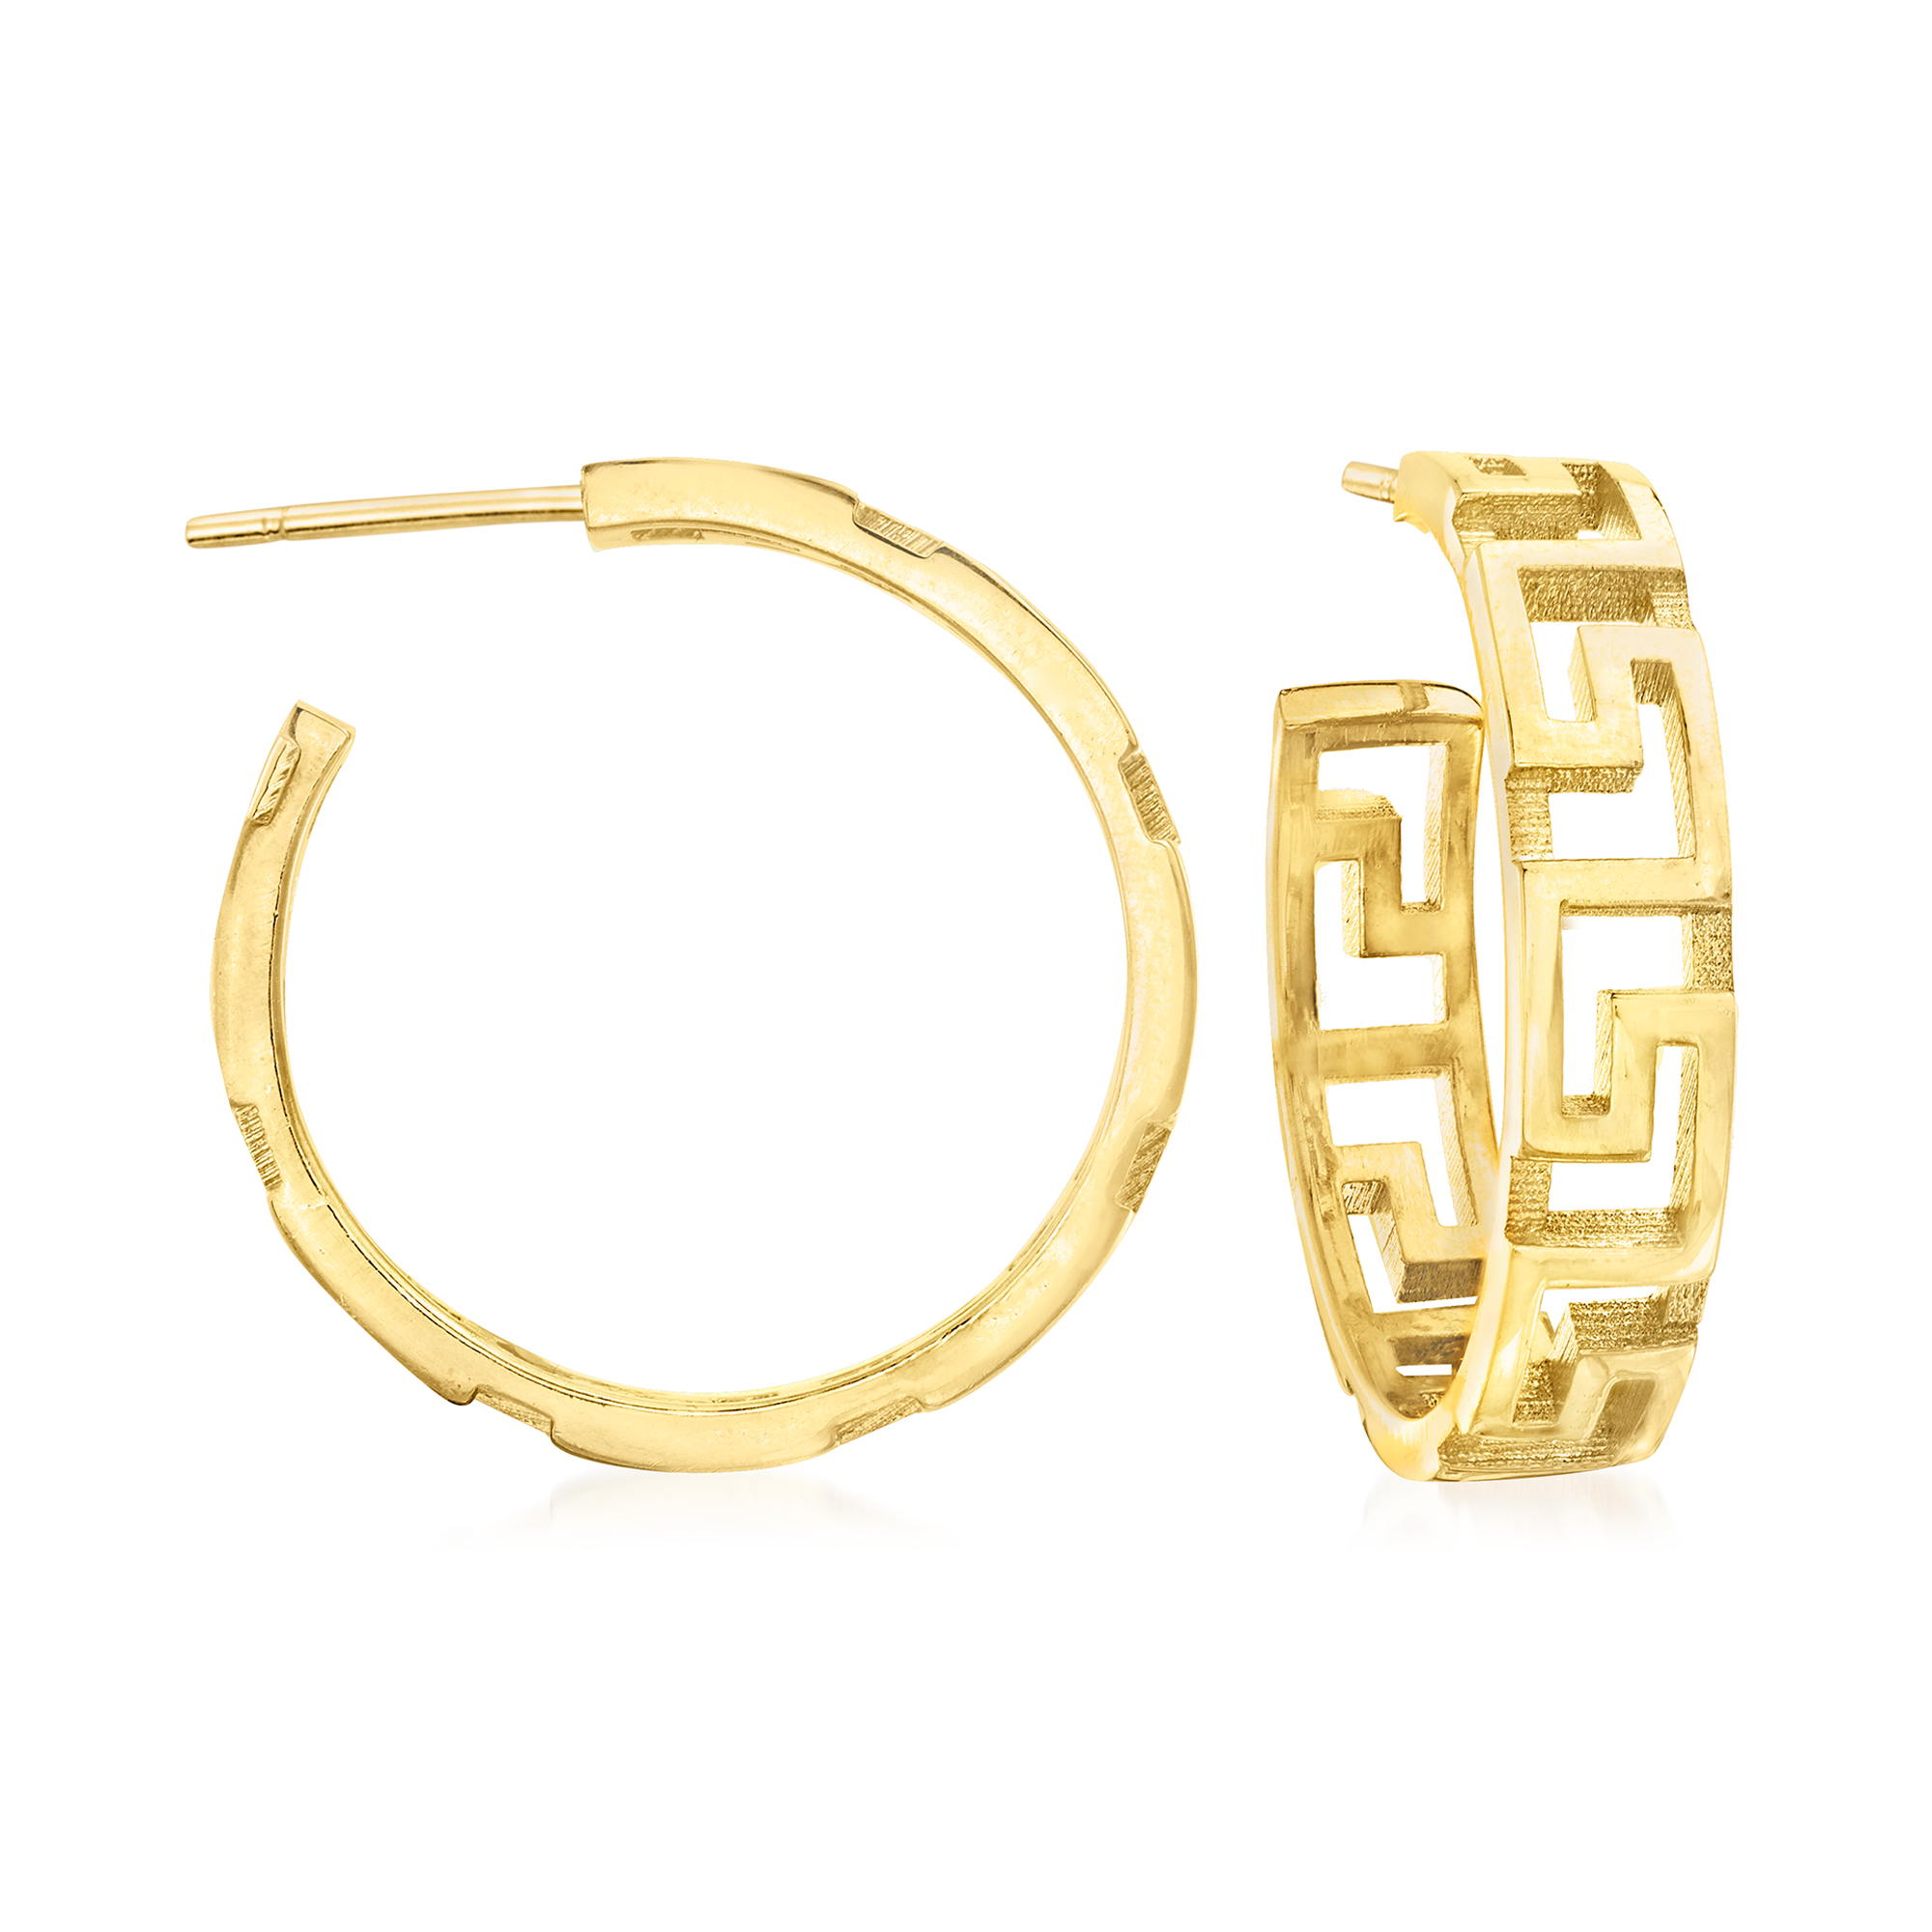 Wellingsale Ladies 14k Two 2 Tone White and Yellow Gold Polished 6mm Greek Design Hoop Earrings 28 x 28 mm